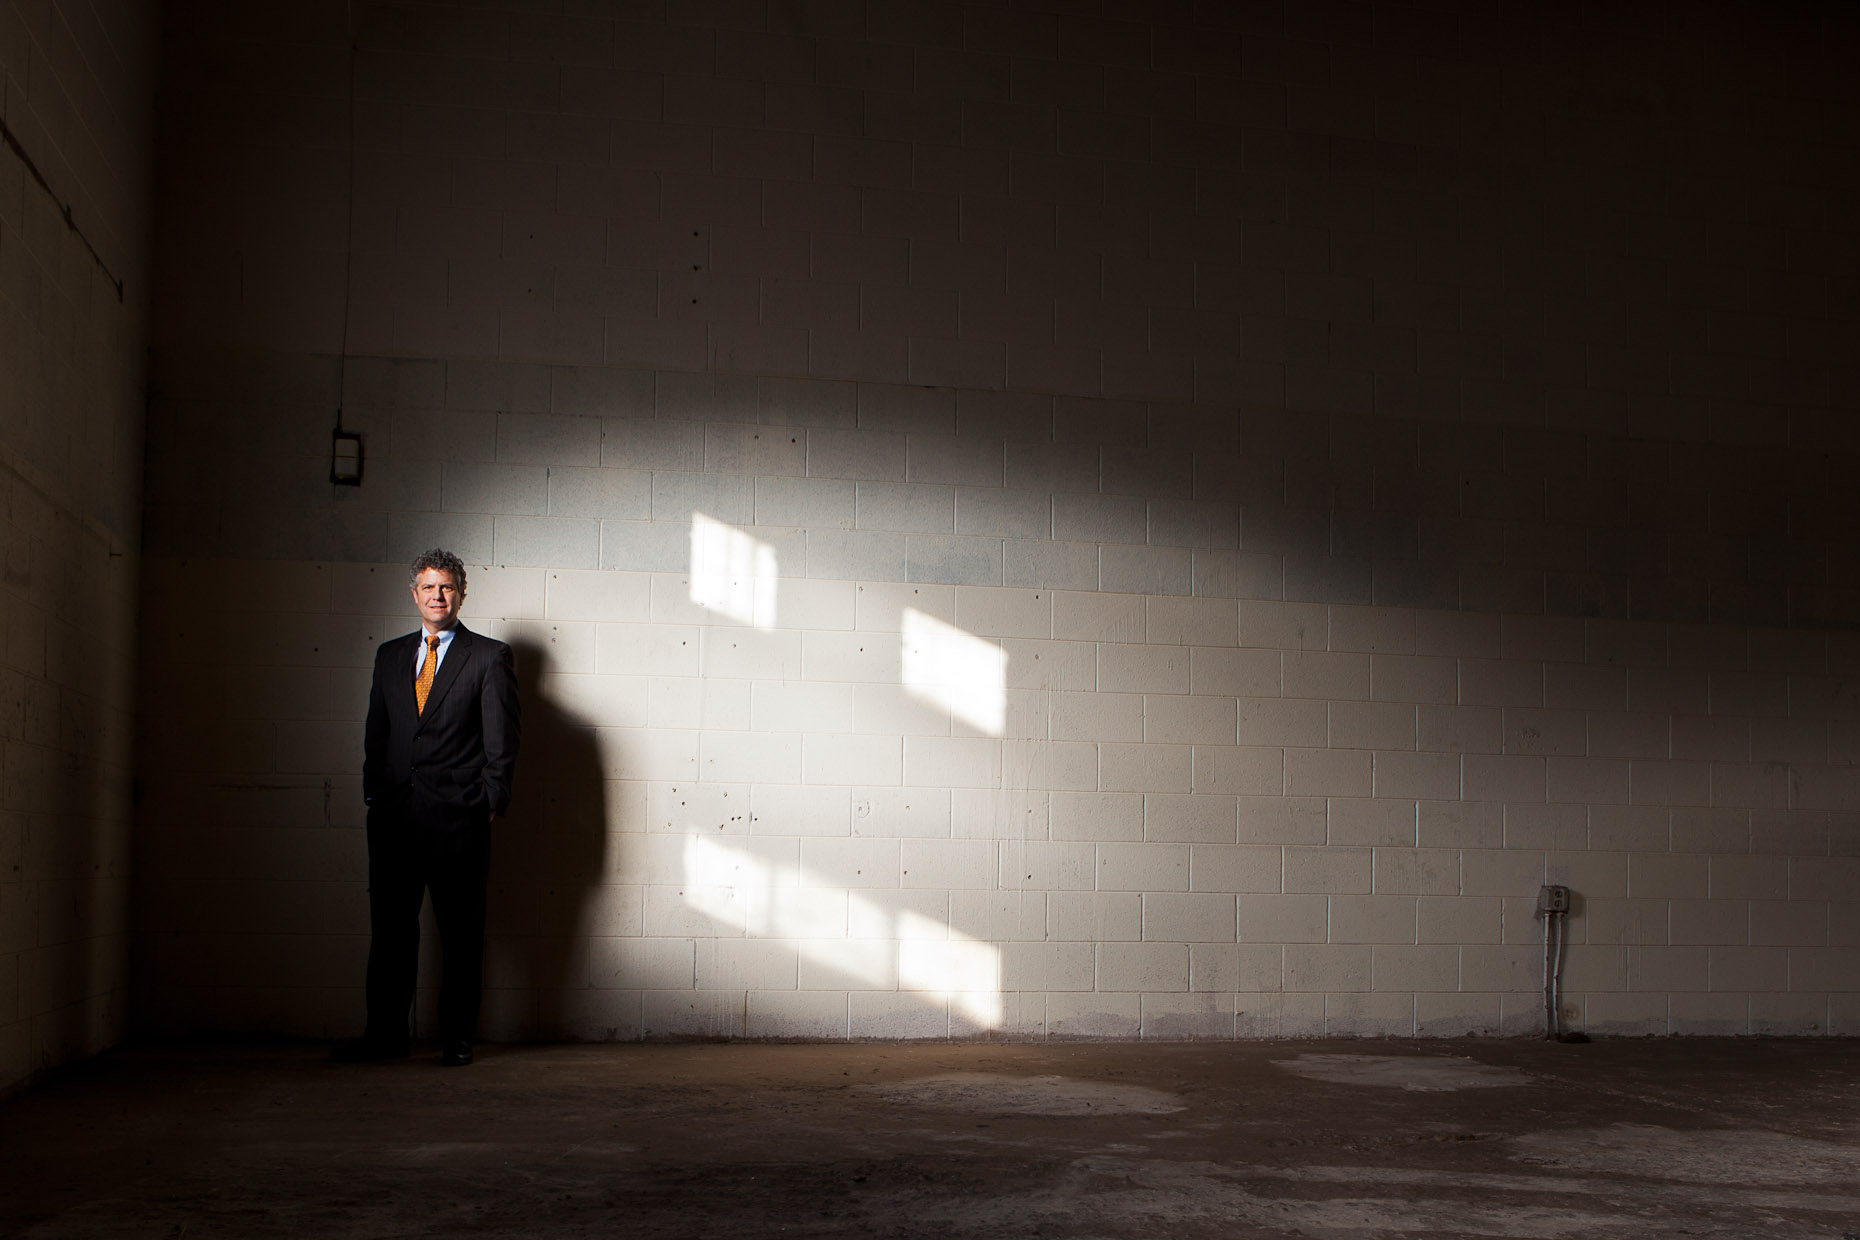 editorial photographer - a real estate broker photographed in an empty building